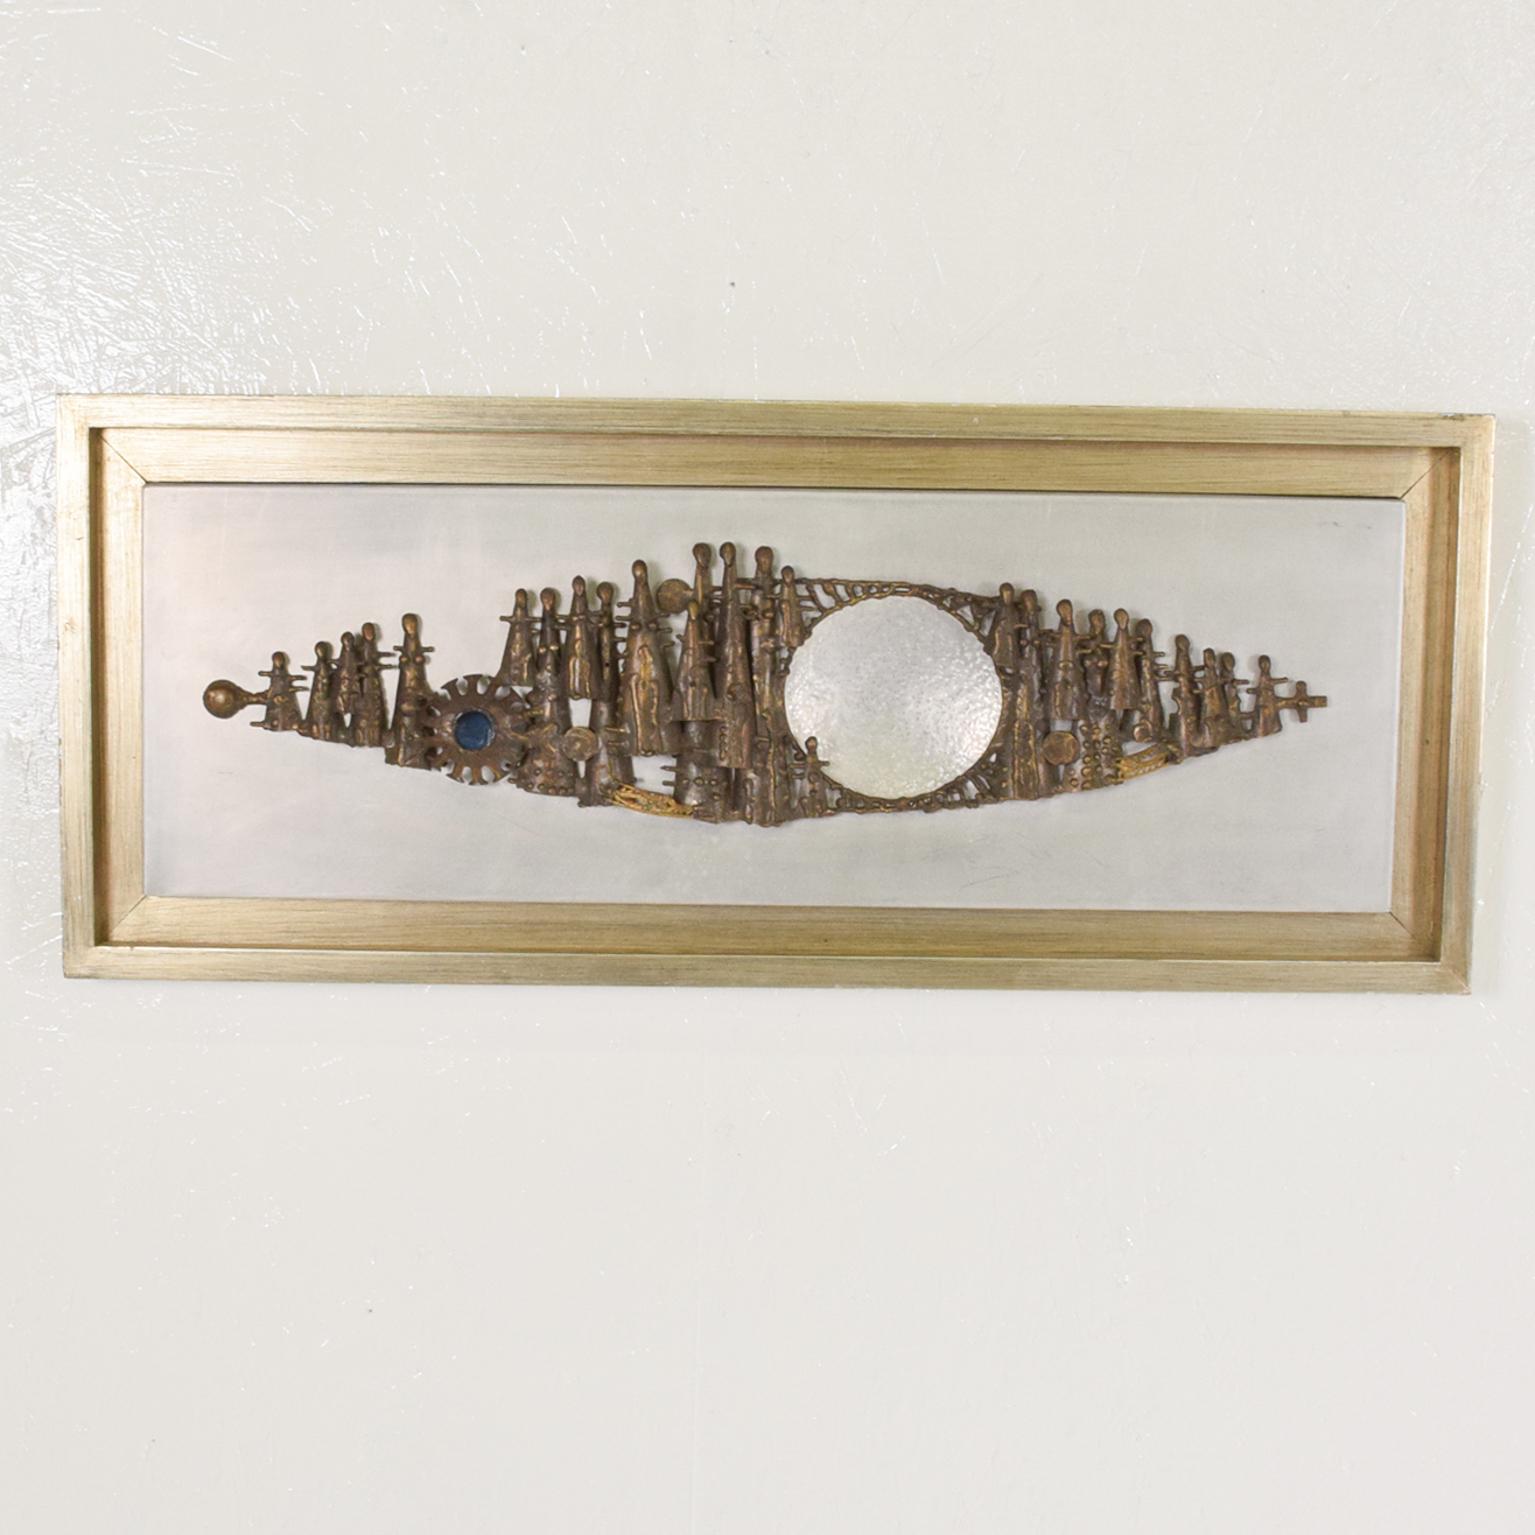 By Gimenez Nunez mixed media Brutalist Wall Art sculpture Mexico 1970s
Made in brass, aluminum and glass. Framed Art. Signed lower right.
Measures: 14 H x 34 W x 2.5 D. inches
Presentation preowned unrestored original vintage condition.
See